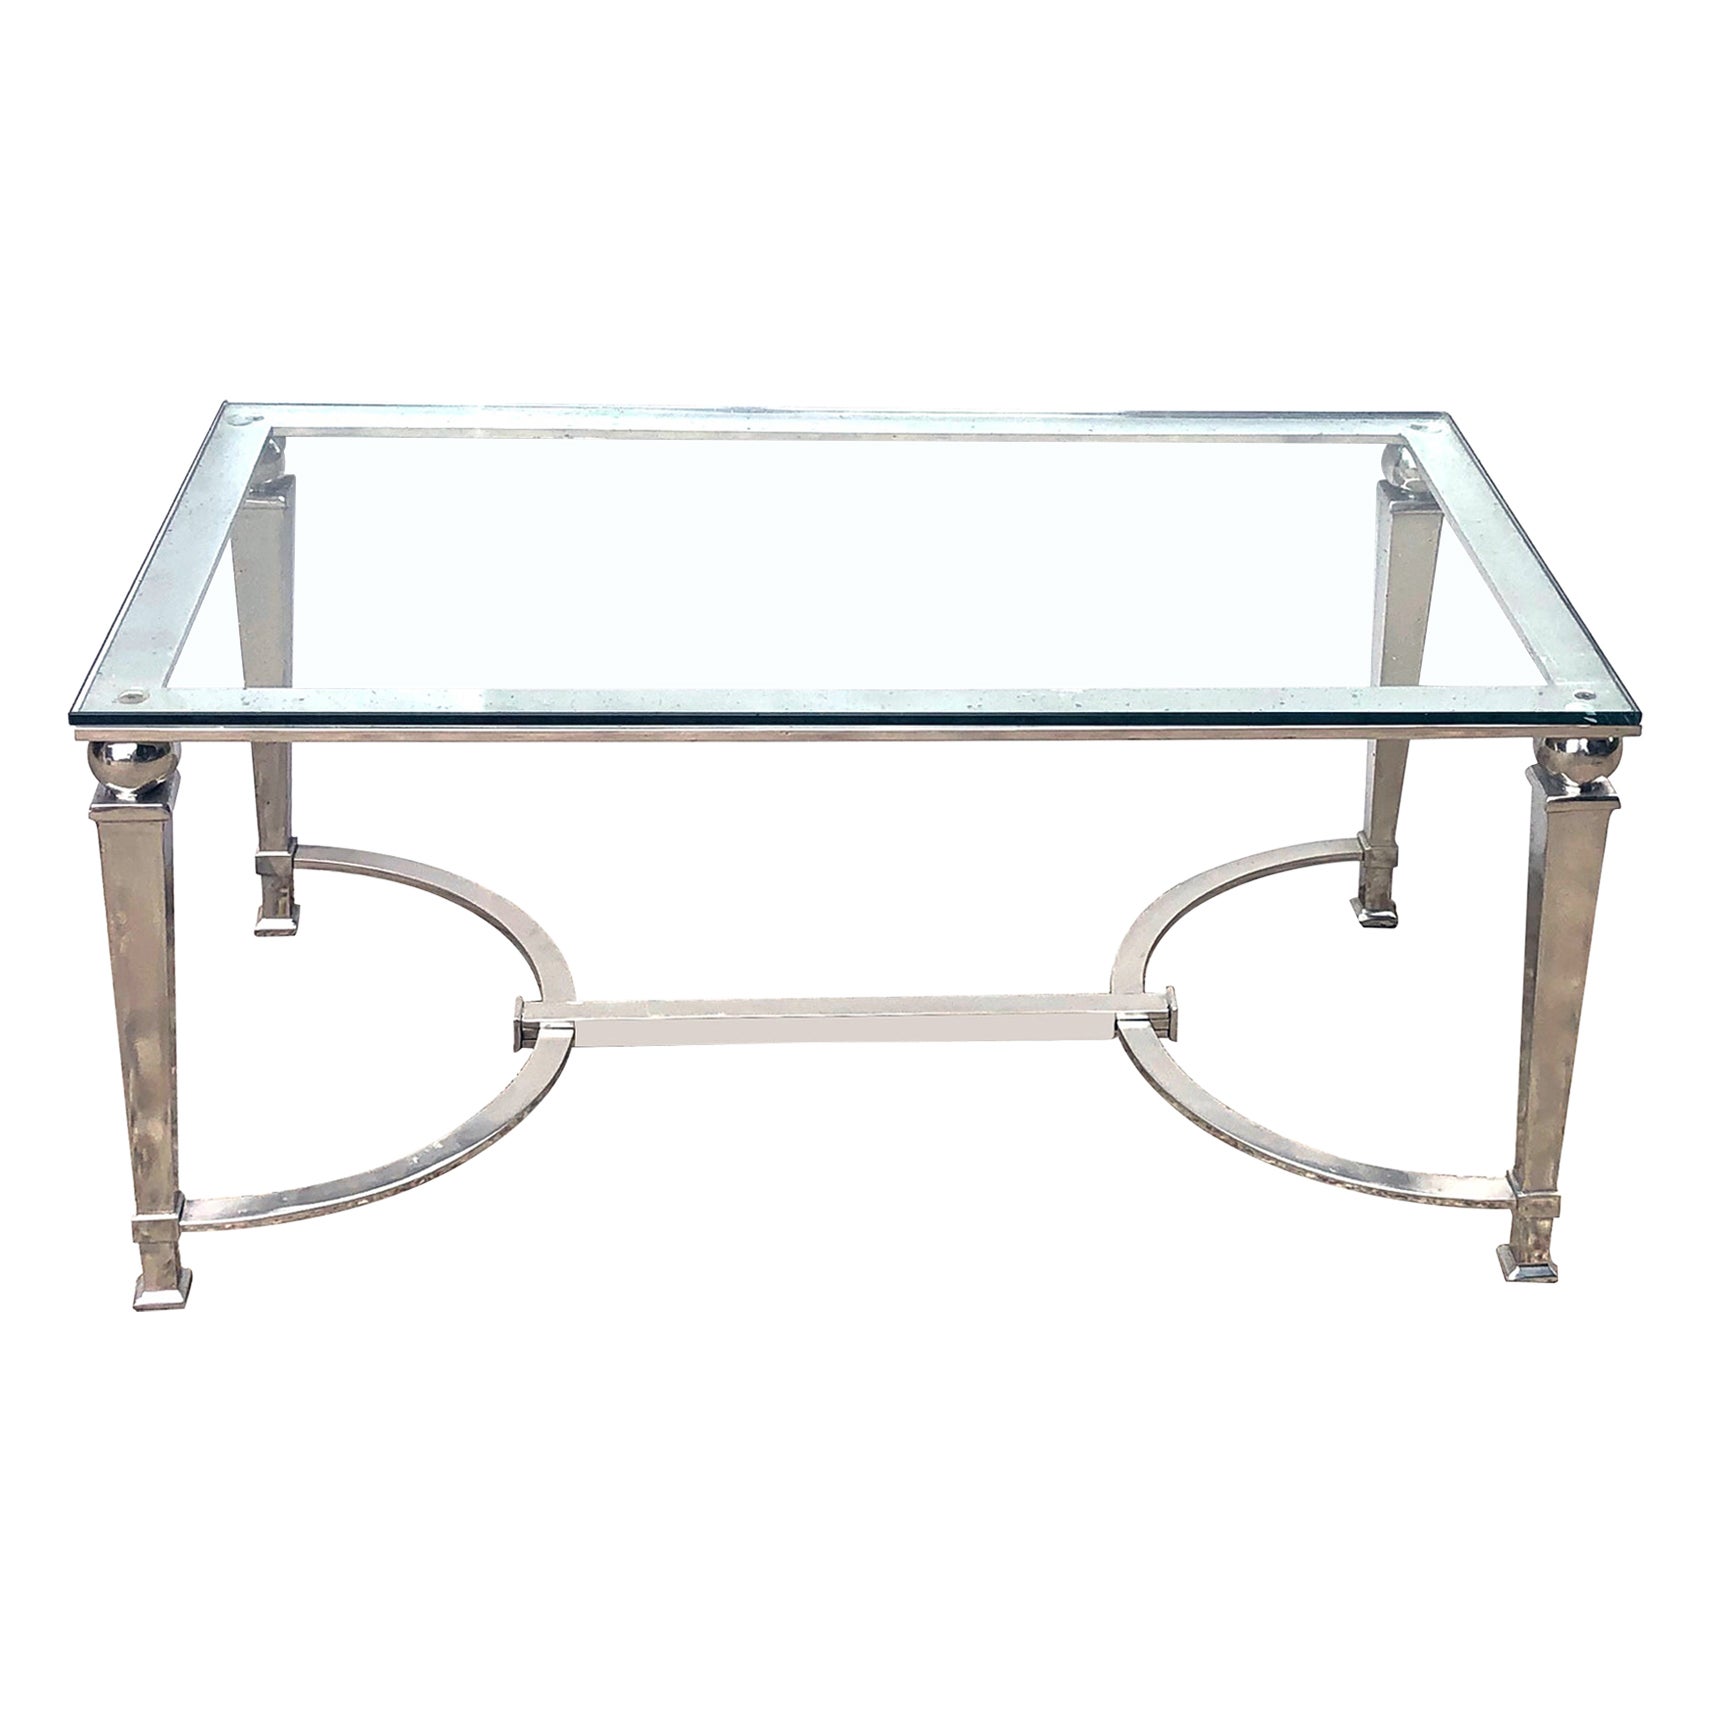 A French Neoclassical Style Chrome Rectangular Coffee Table with Glass Top